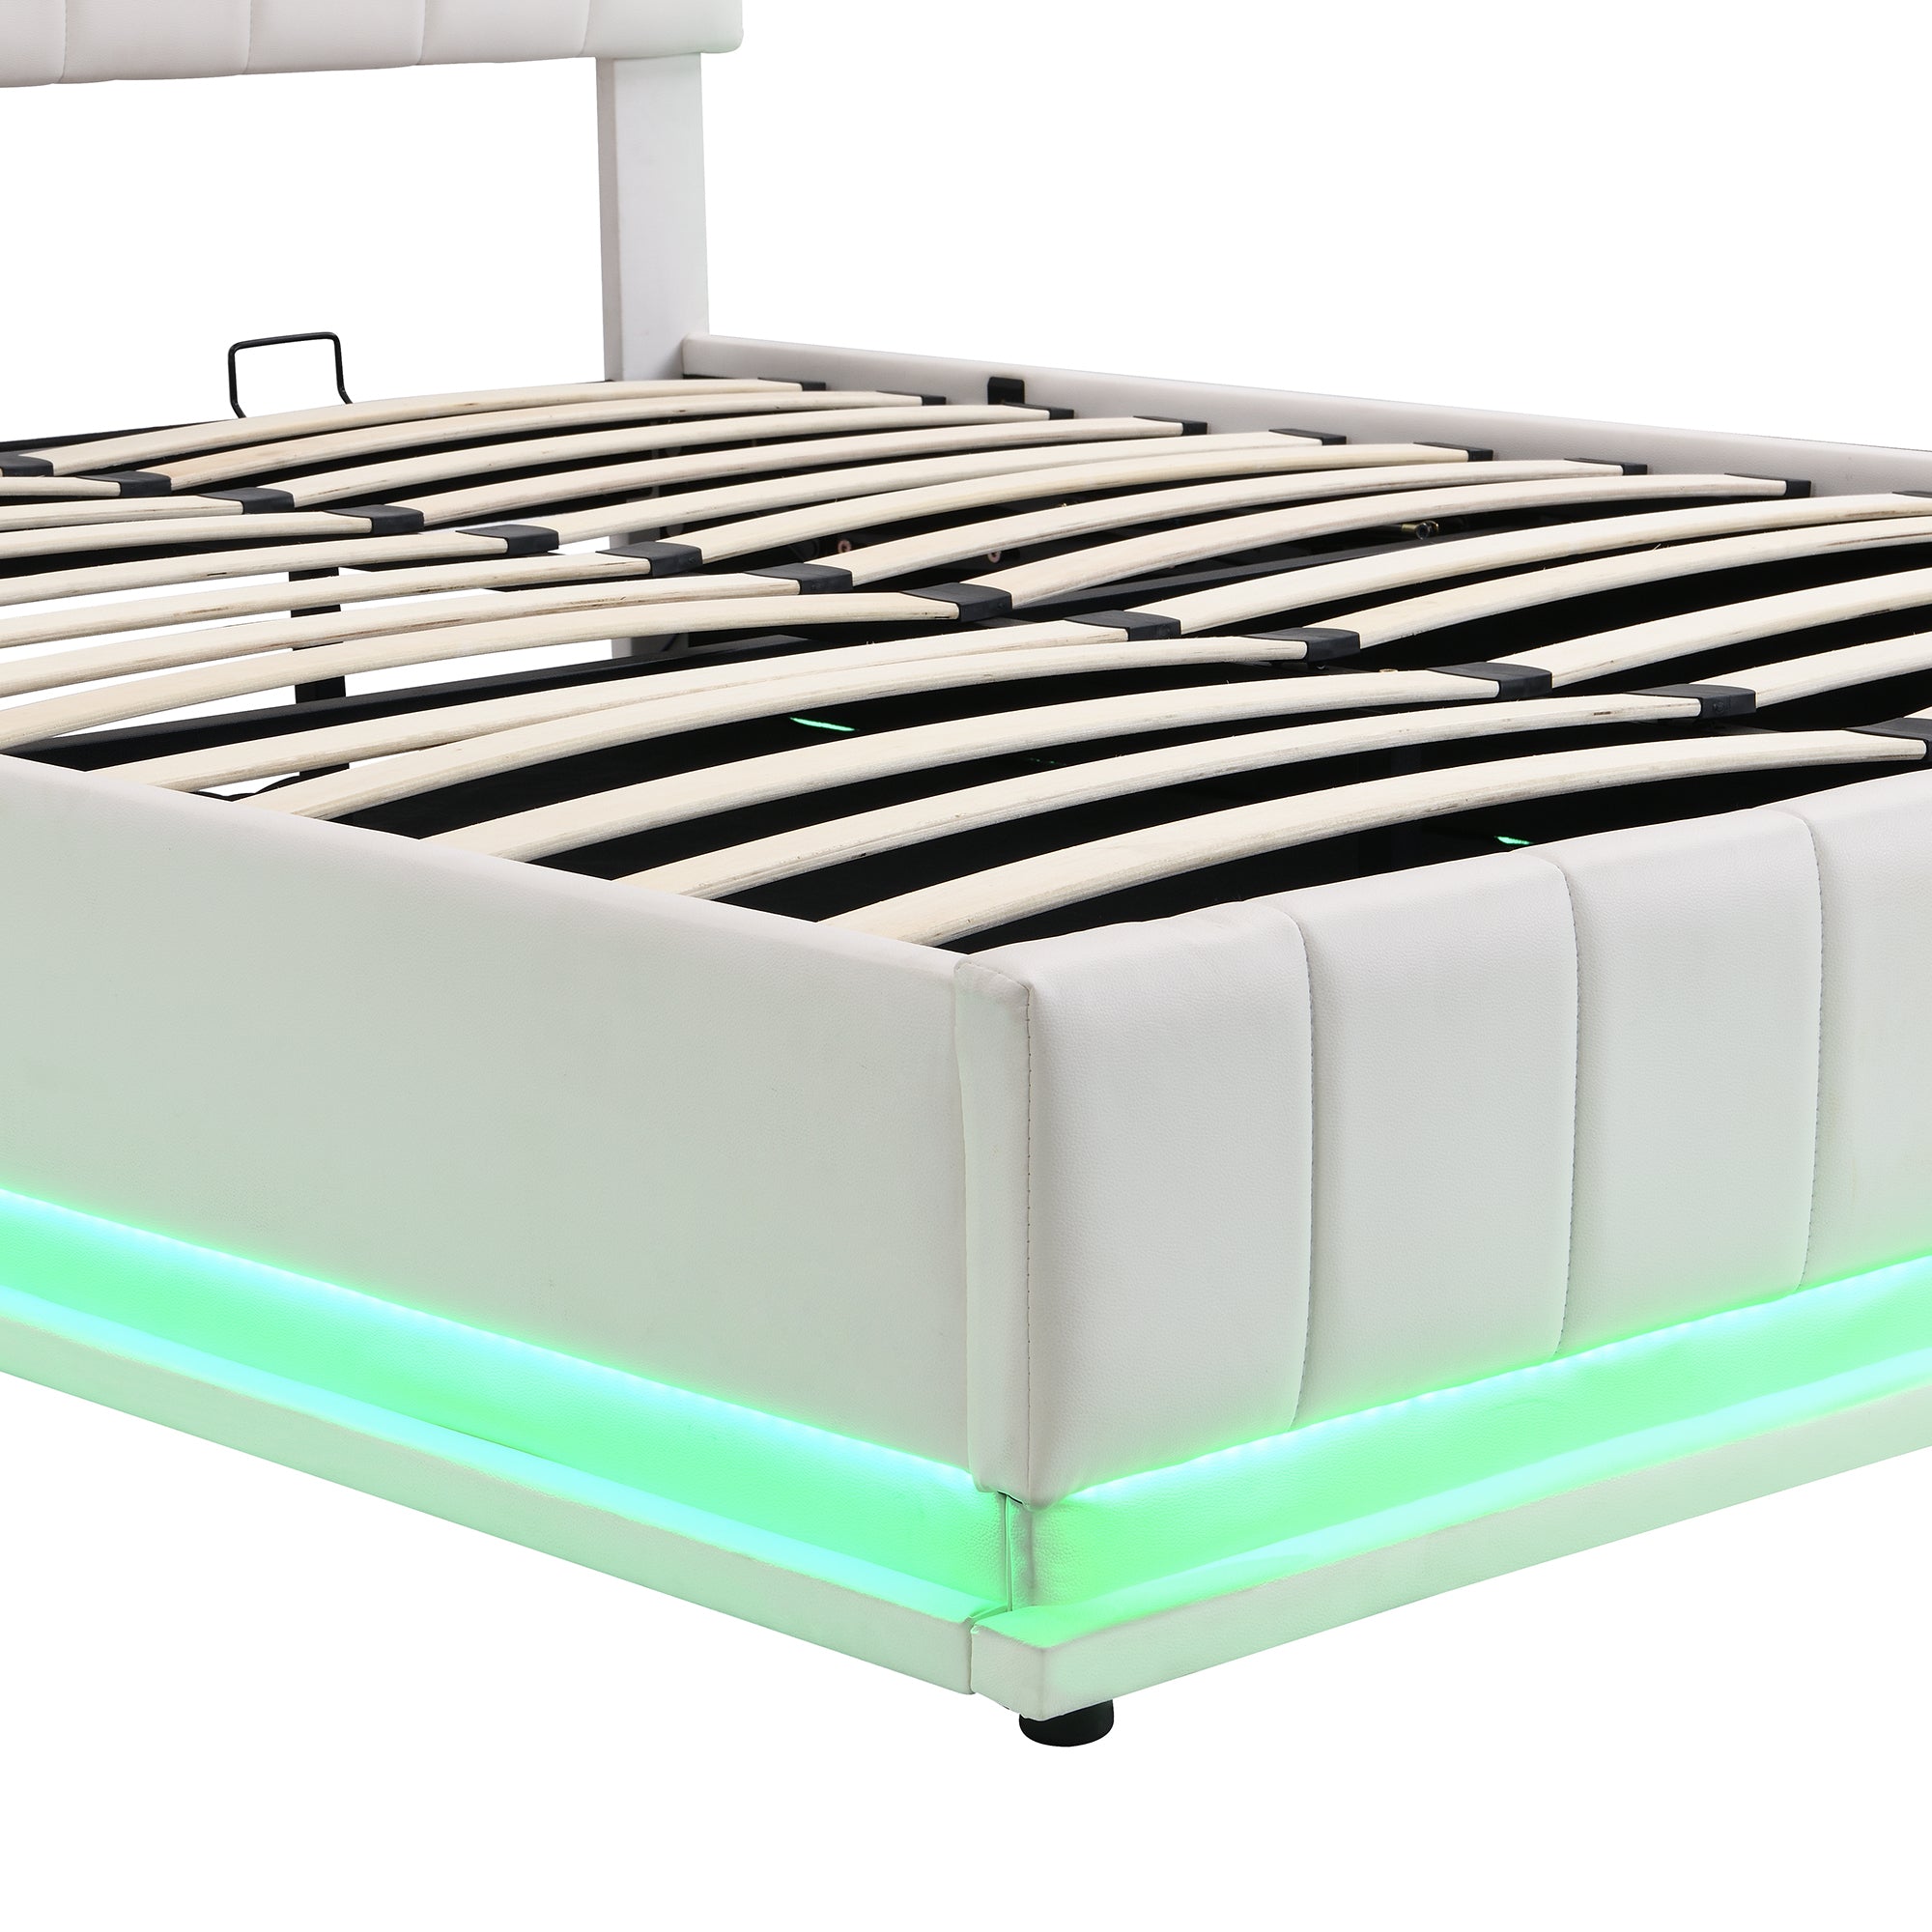 Skylar White Faux Leather Queen Platform Bed with Hydraulic Storage System and LED Light, Modern Platform Bed with Sockets and USB Ports